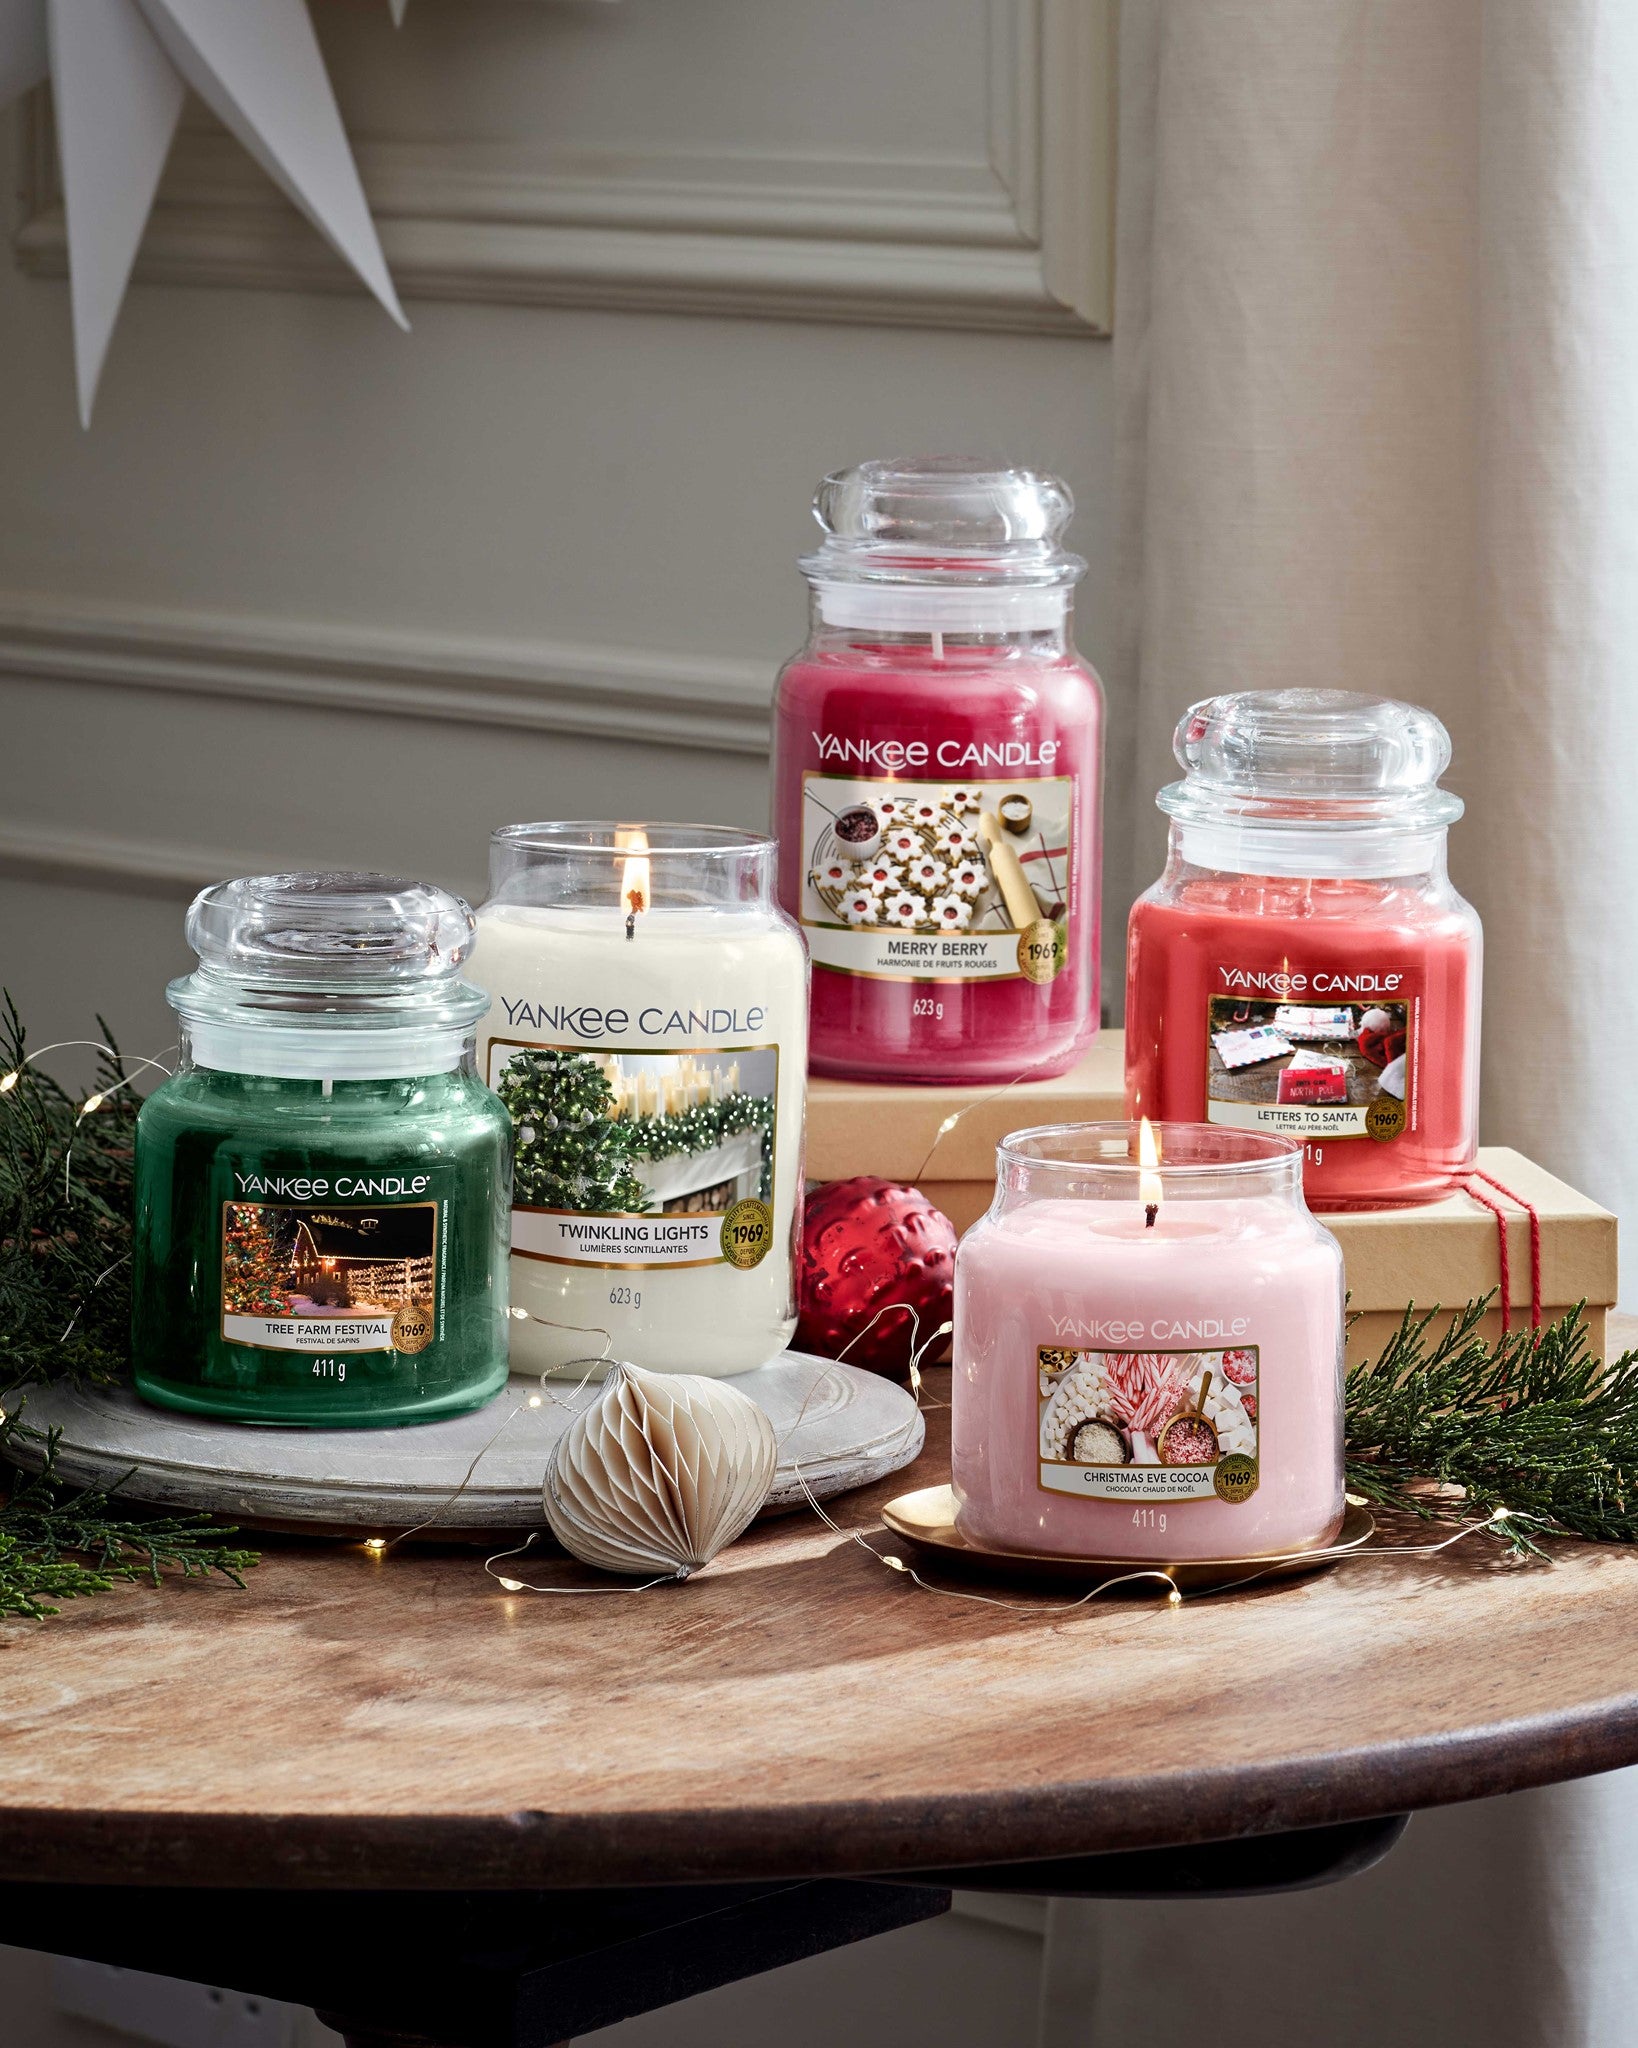 MERRY BERRY -Yankee Candle- Giara Media – Candle With Care